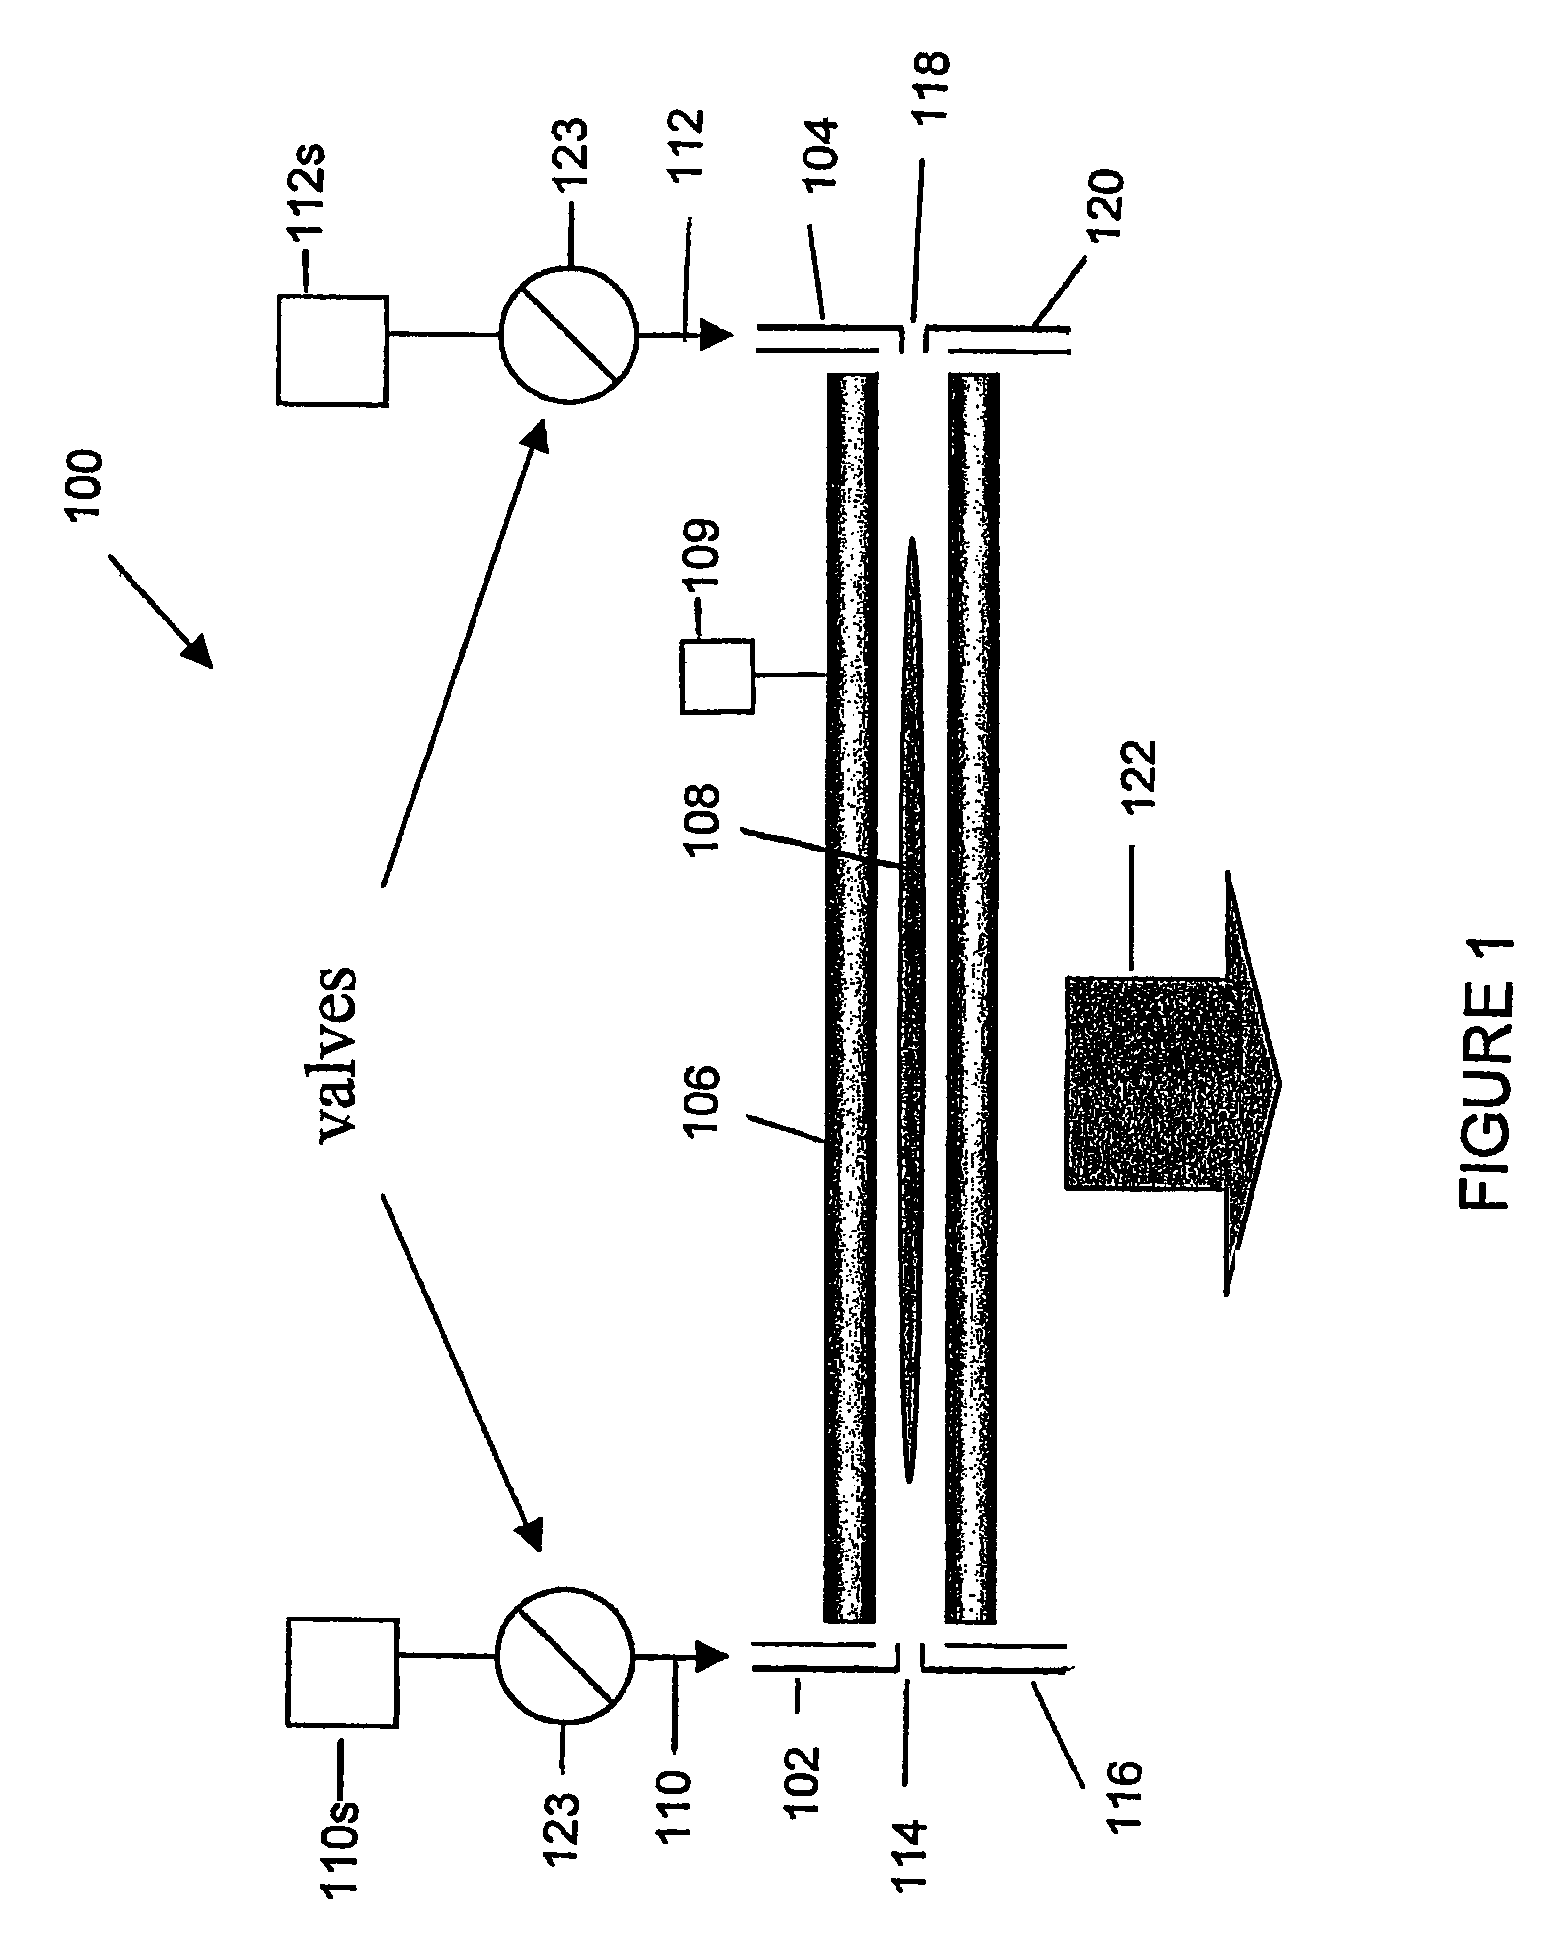 Method and apparatus for providing ion barriers at the entrance and exit ends of a mass spectrometer